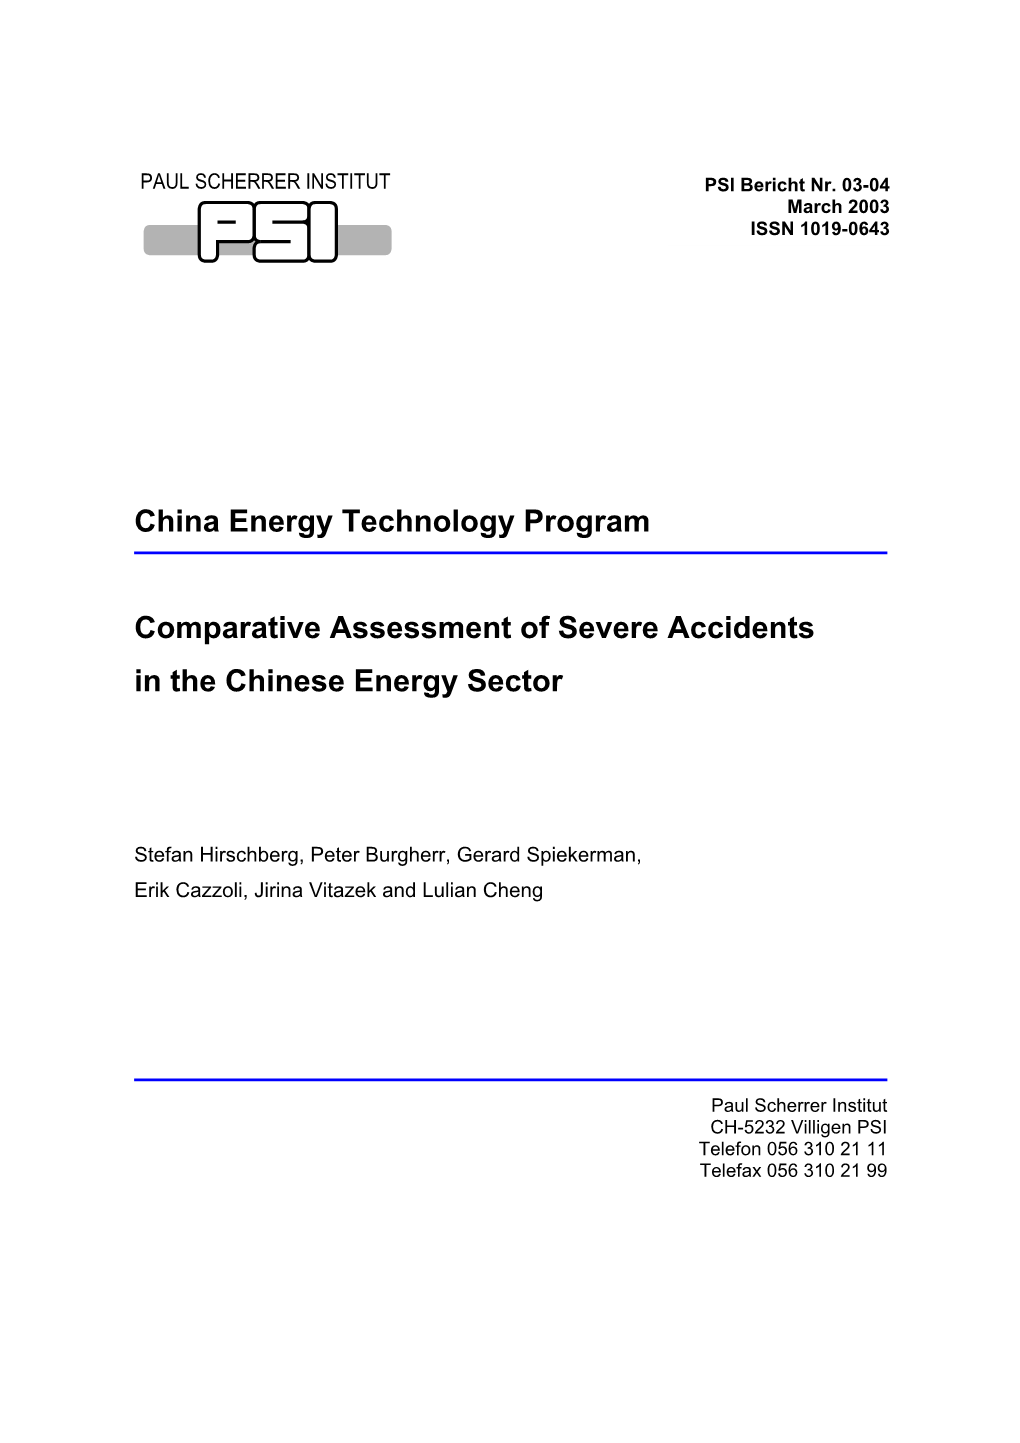 Comparative Assessment of Severe Accidents in the Chinese Energy Sector